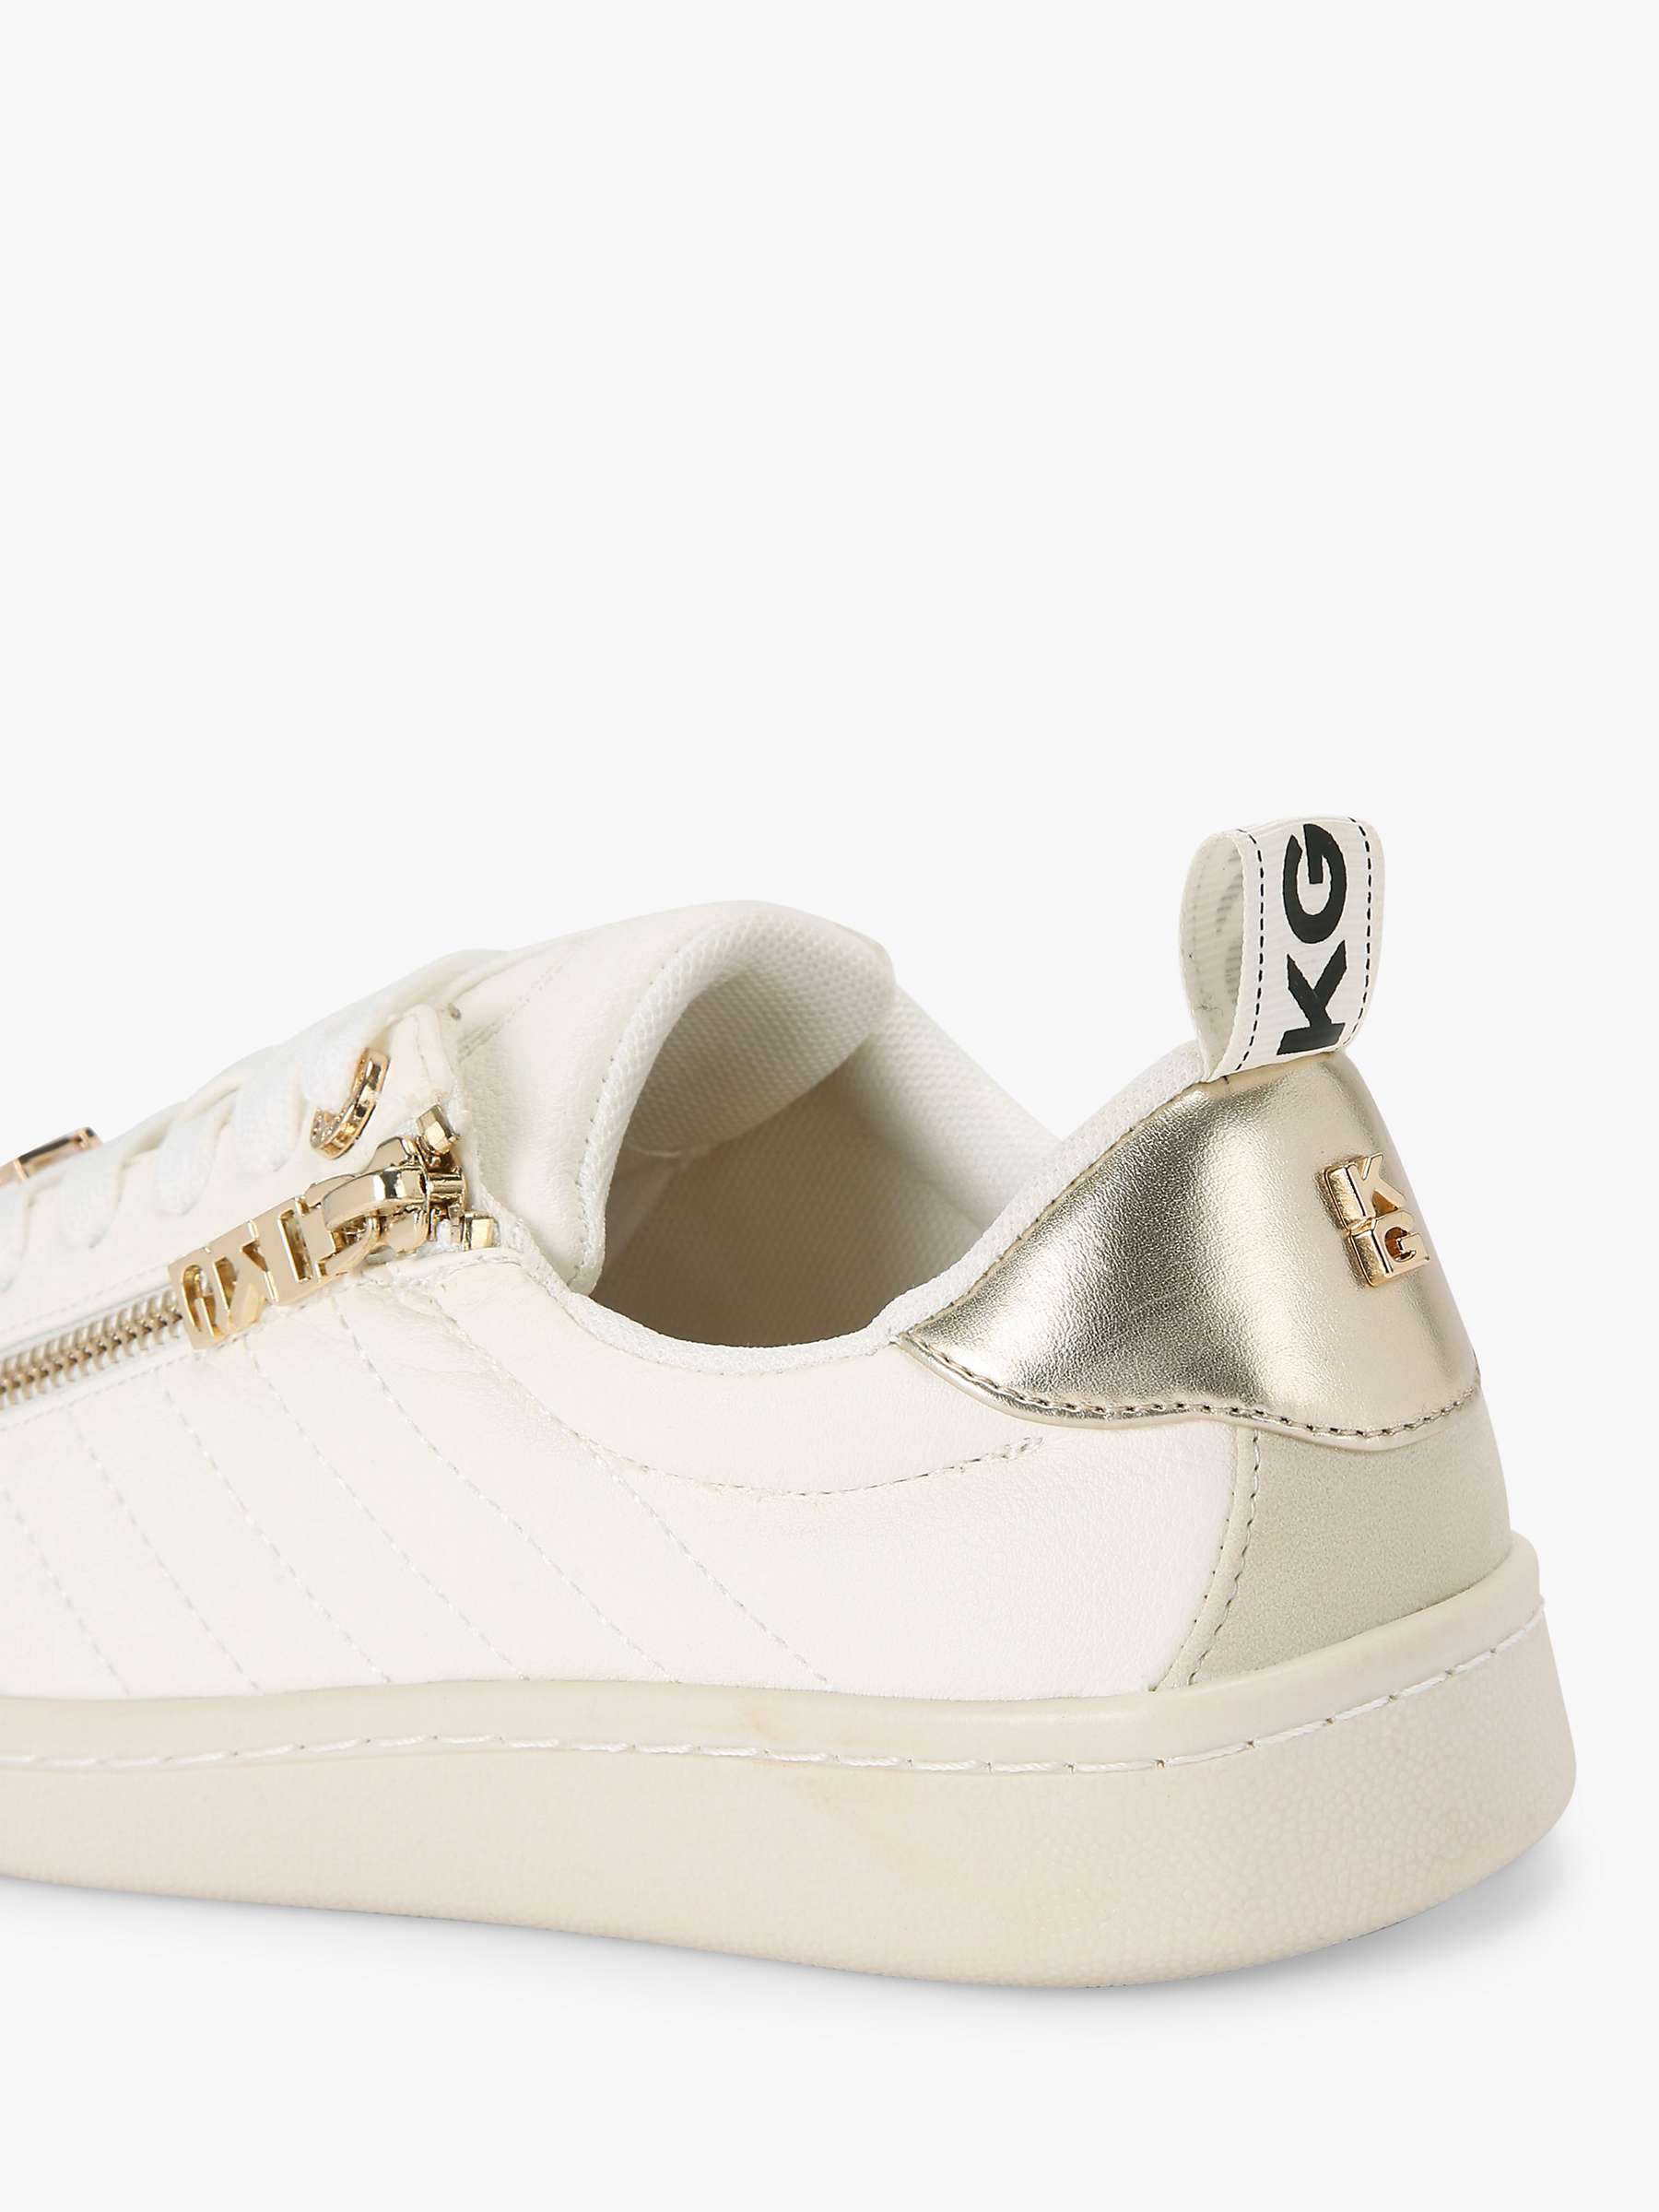 Buy KG Kurt Geiger Liza Zip Quilted Trainers, White Online at johnlewis.com